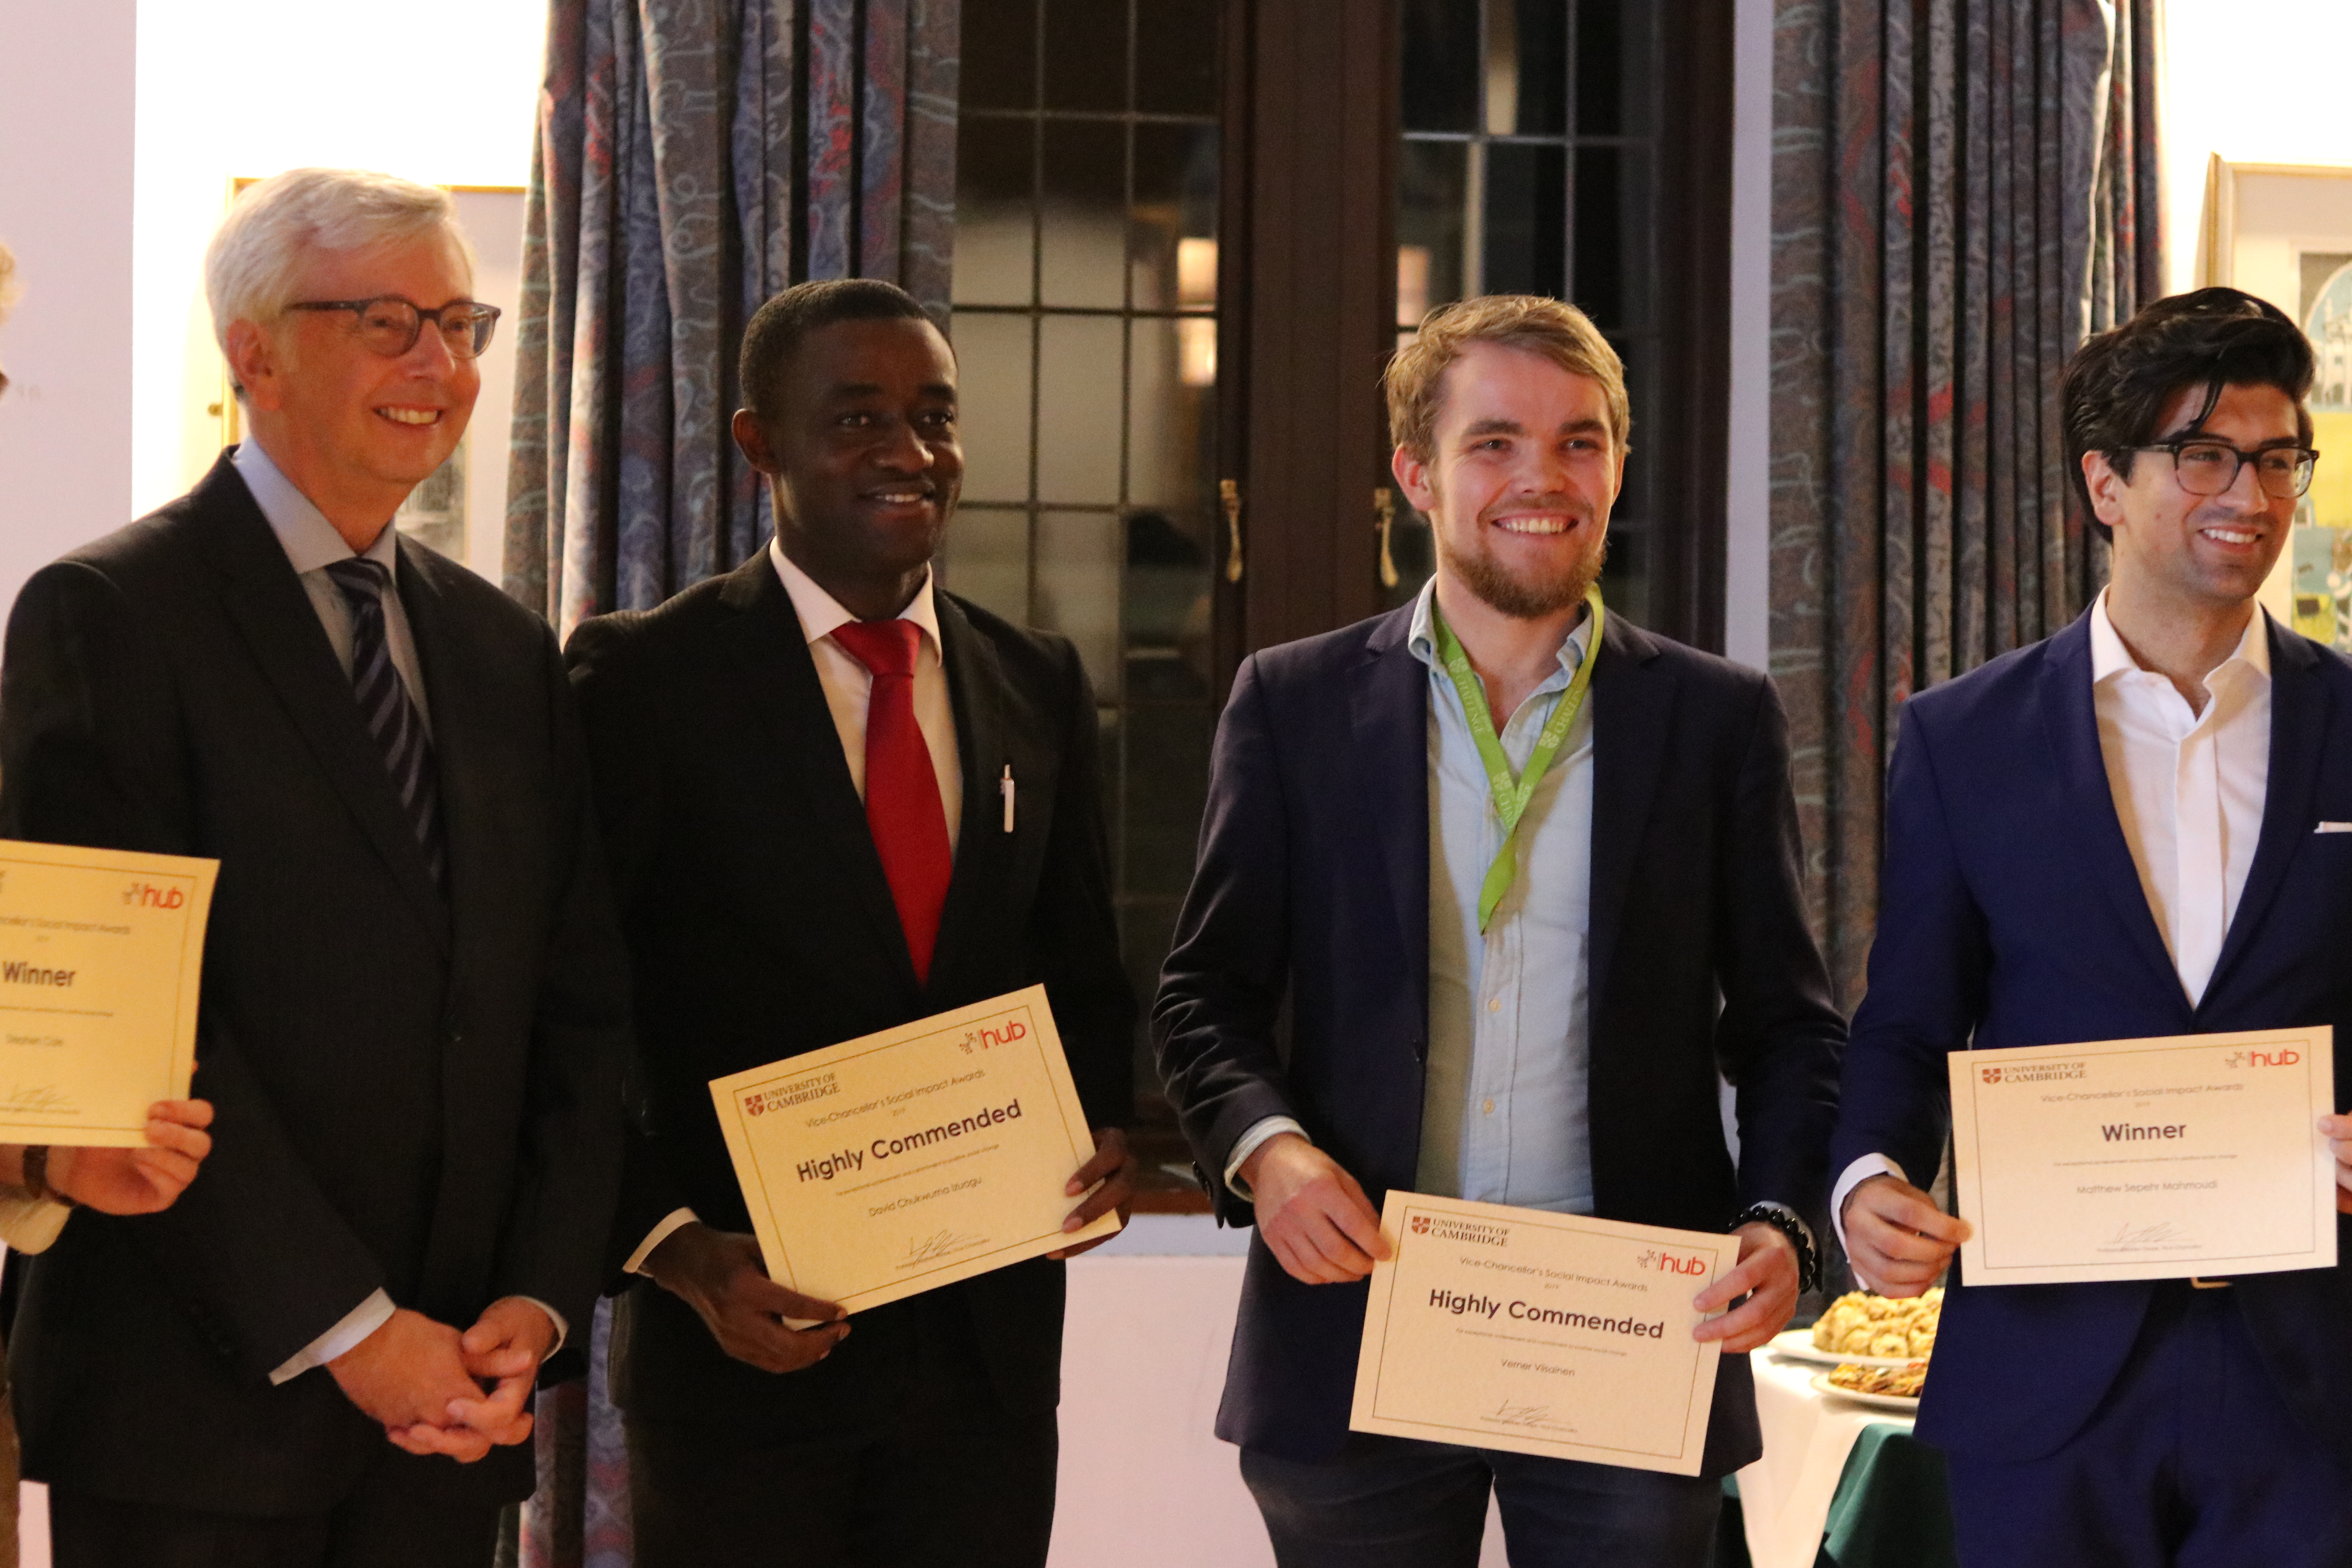 David Izuogu and other award recipients with Vice Chancellor Professor Stephen Toope